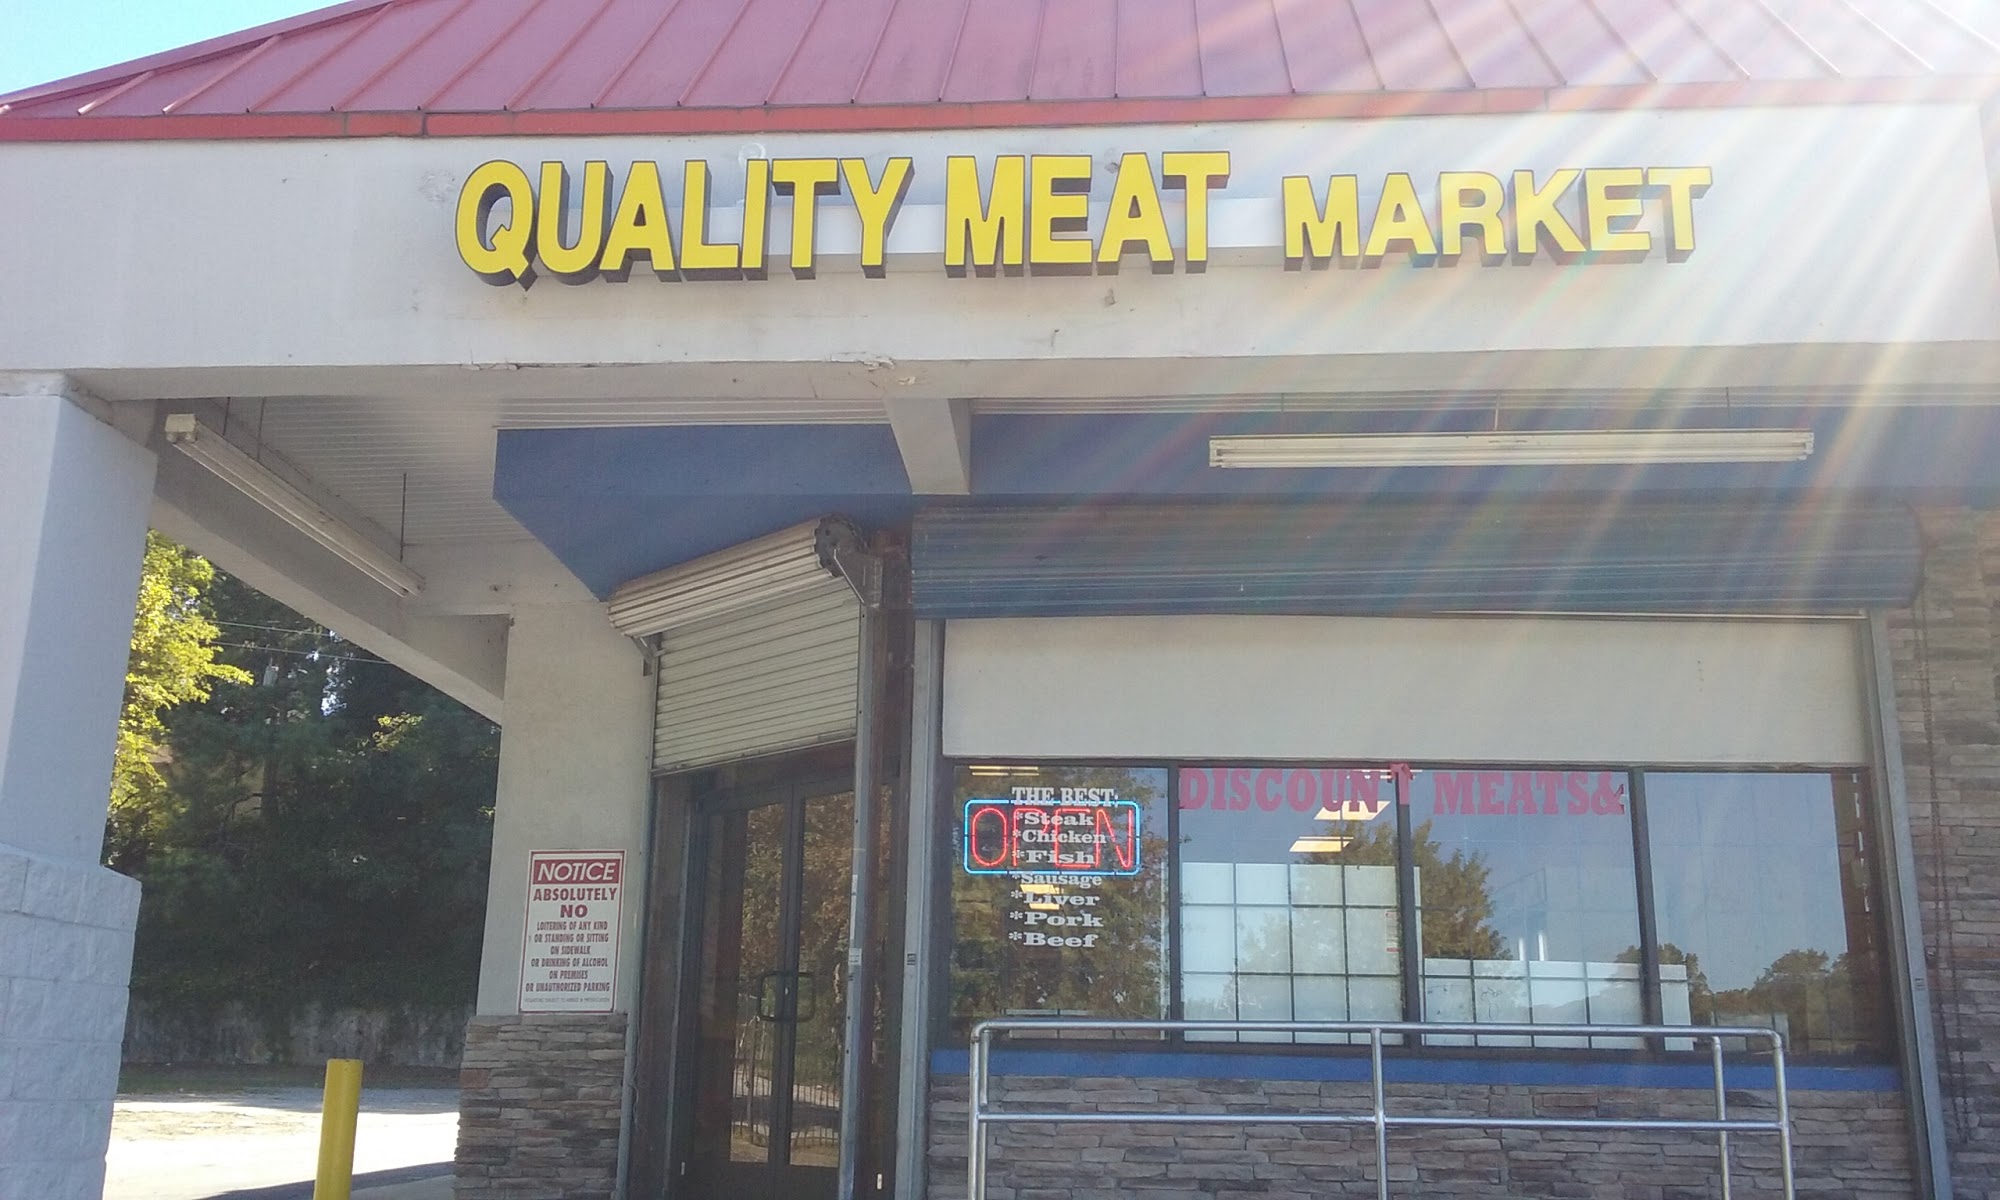 Quality Meat Market